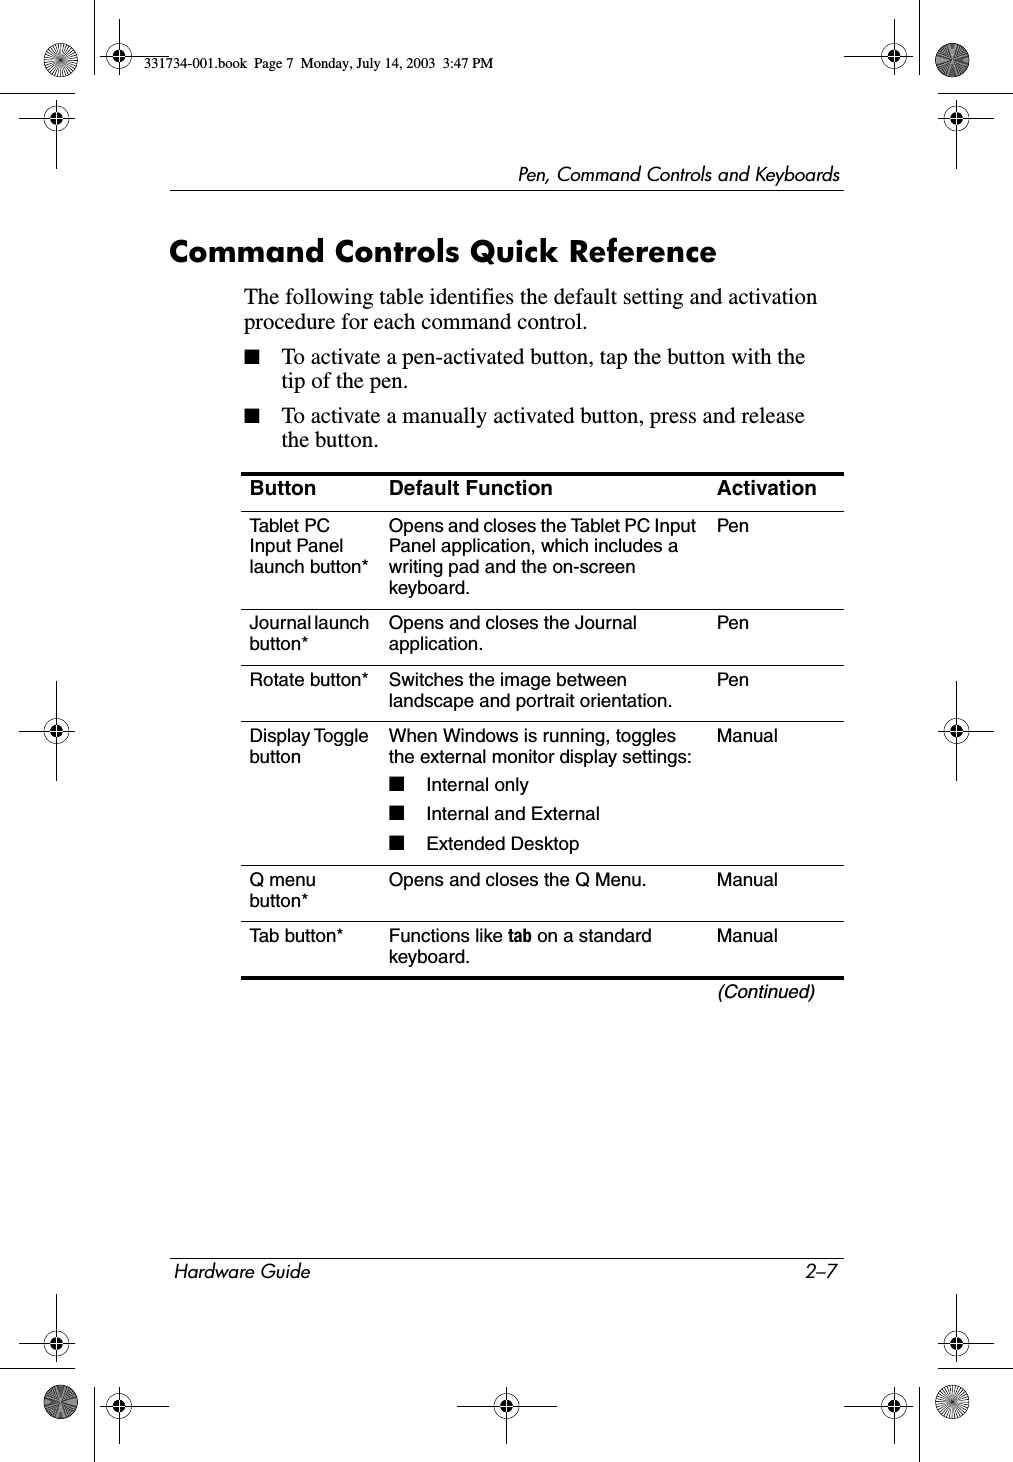 Pen, Command Controls and KeyboardsHardware Guide 2–7Command Controls Quick ReferenceThe following table identifies the default setting and activation procedure for each command control.■To activate a pen-activated button, tap the button with the tip of the pen.■To activate a manually activated button, press and release the button.Button Default Function ActivationTabl e t P C  Input Panel launch button*Opens and closes the Tablet PC Input Panel application, which includes a writing pad and the on-screen keyboard.PenJournal launch button*Opens and closes the Journal application.PenRotate button* Switches the image between landscape and portrait orientation.PenDisplay Toggle buttonWhen Windows is running, toggles the external monitor display settings:■Internal only■Internal and External■Extended DesktopManualQ menu button*Opens and closes the Q Menu. ManualTab button* Functions like tab on a standard keyboard.Manual(Continued)331734-001.book  Page 7  Monday, July 14, 2003  3:47 PM